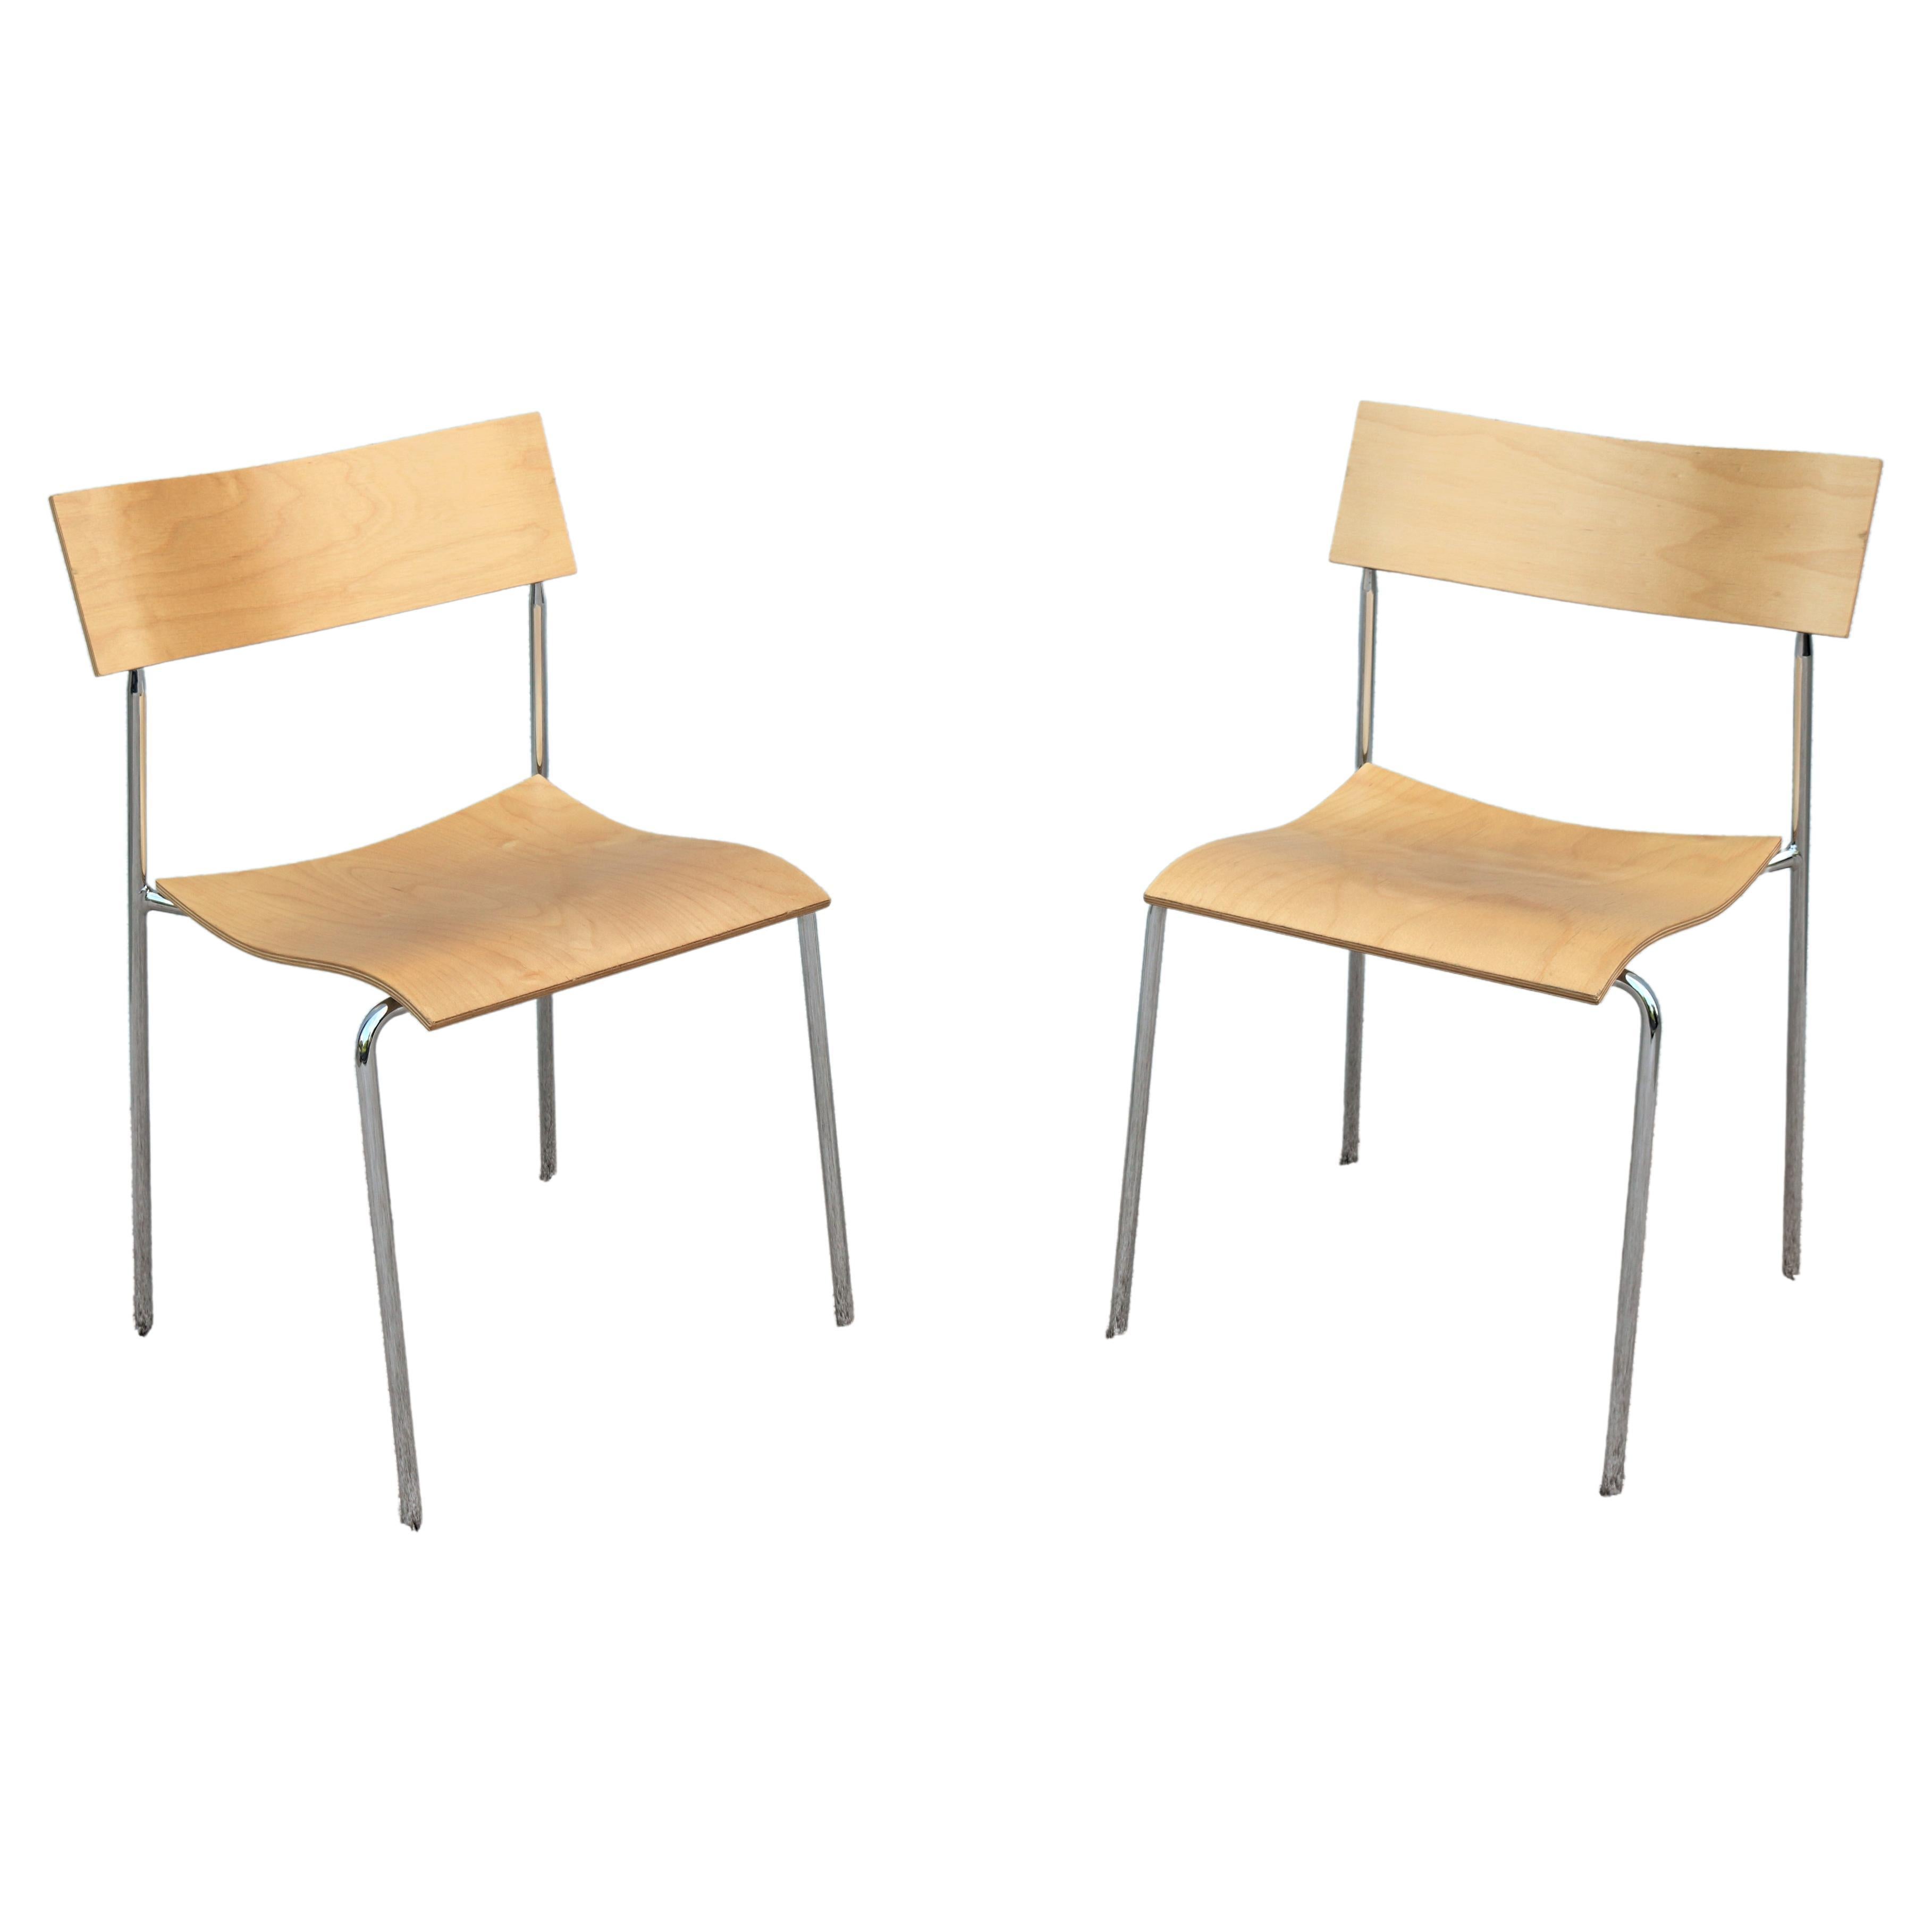 1992 Sweden Modern Campus AB Chairs by Johannes Foersom for Lammhults, a Pair